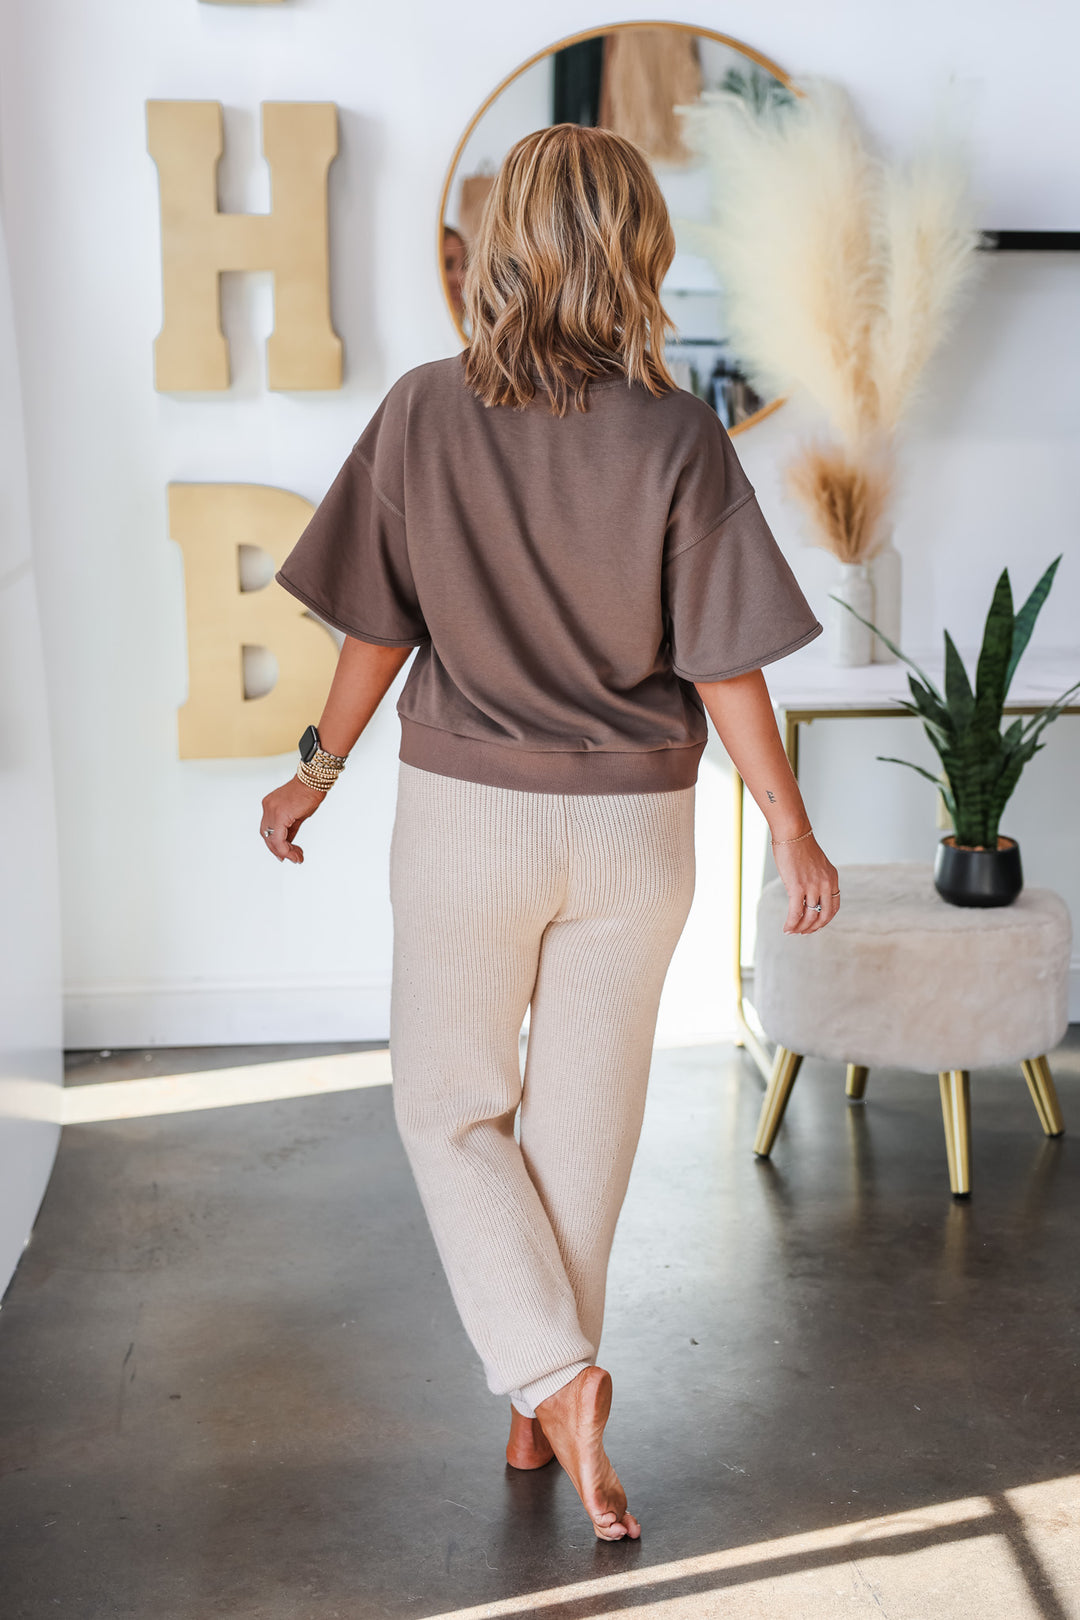 A woman standing in a shop wearing a brown short sleeve sweatshirt and taupe knit joggers with oversized front pockets. She is rear facing.